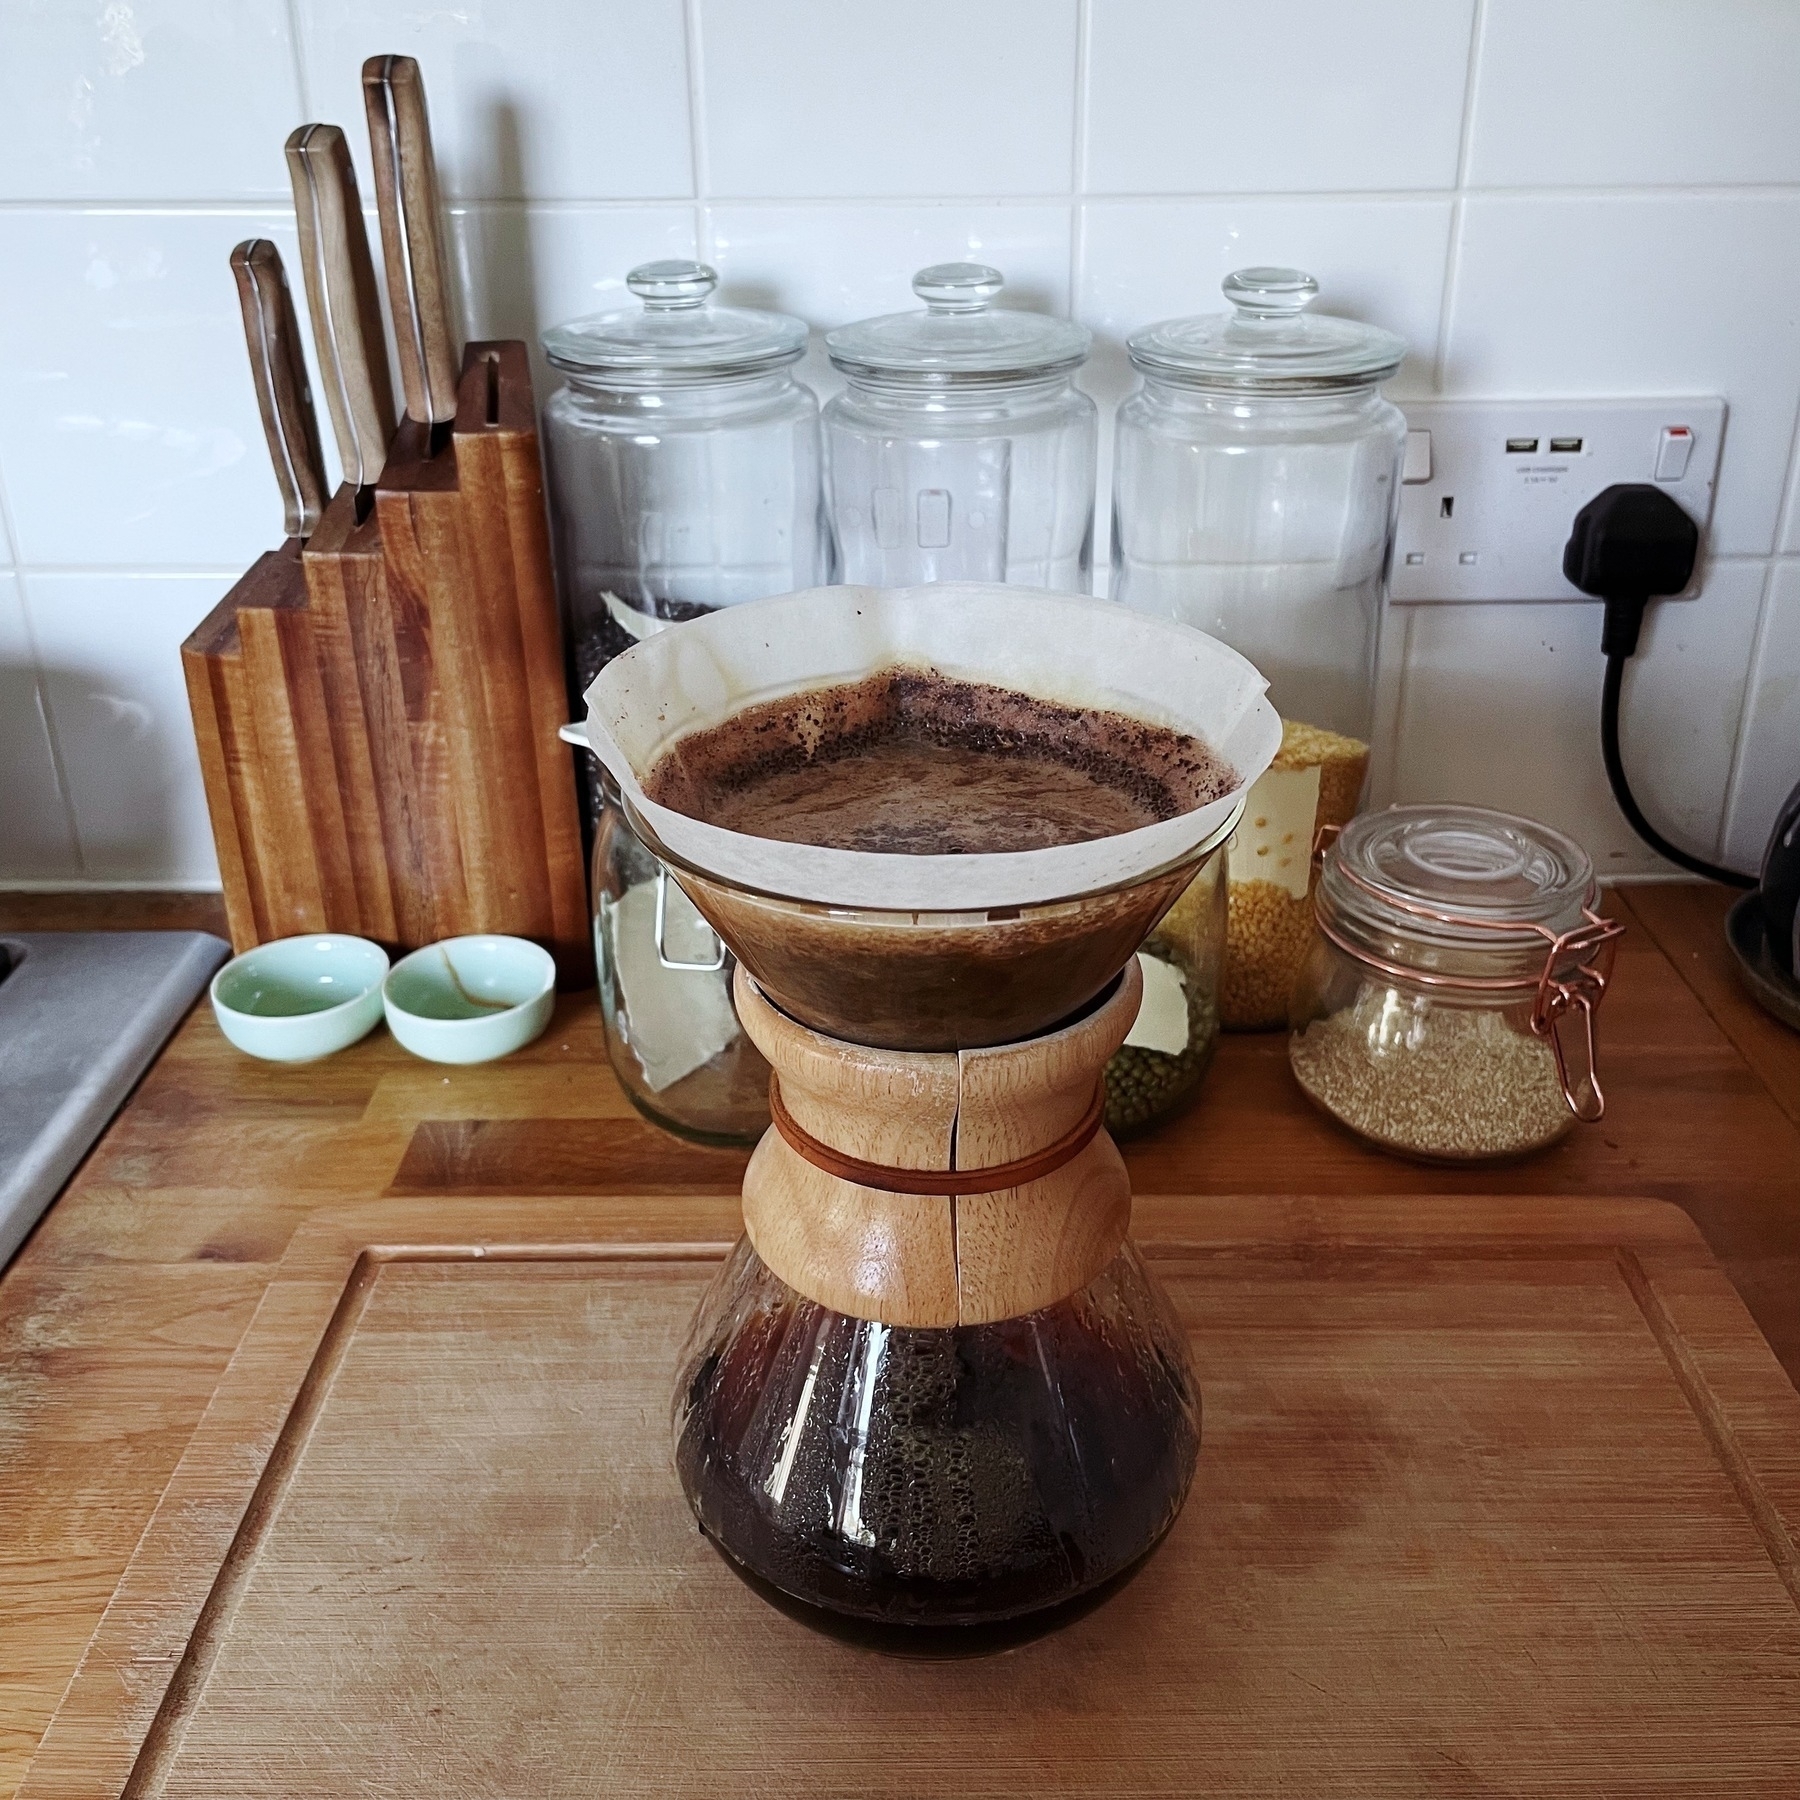 Coffee being made in a conical glass dripper.